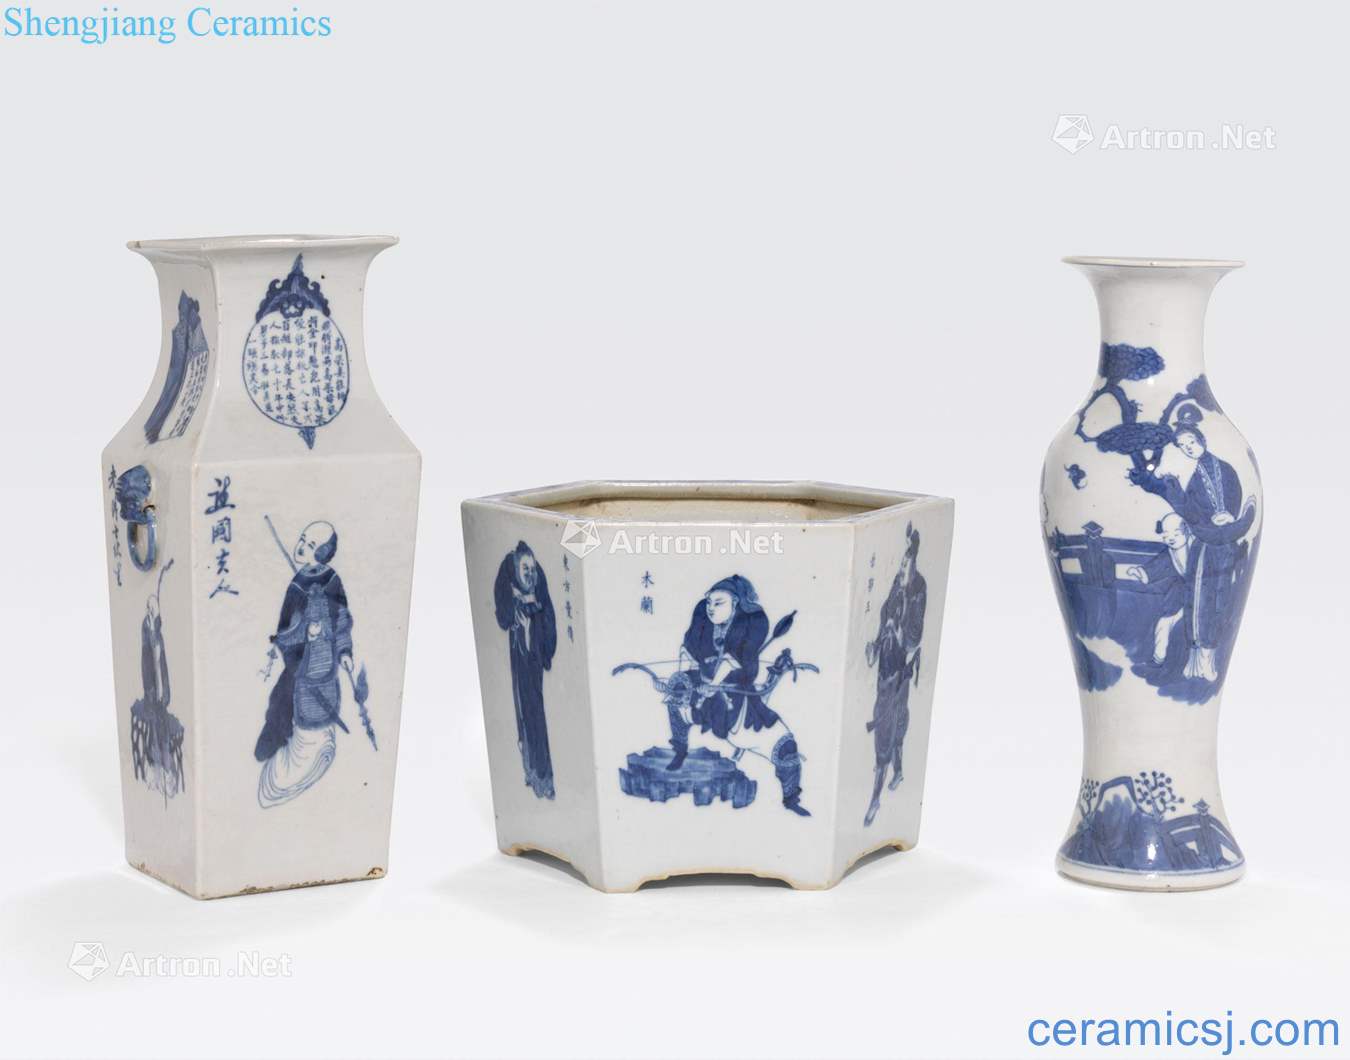 The newest the Qing/Republic period A GROUP OF THREE BLUE AND WHITE VESSELS WITH FIGURAL DECORATION